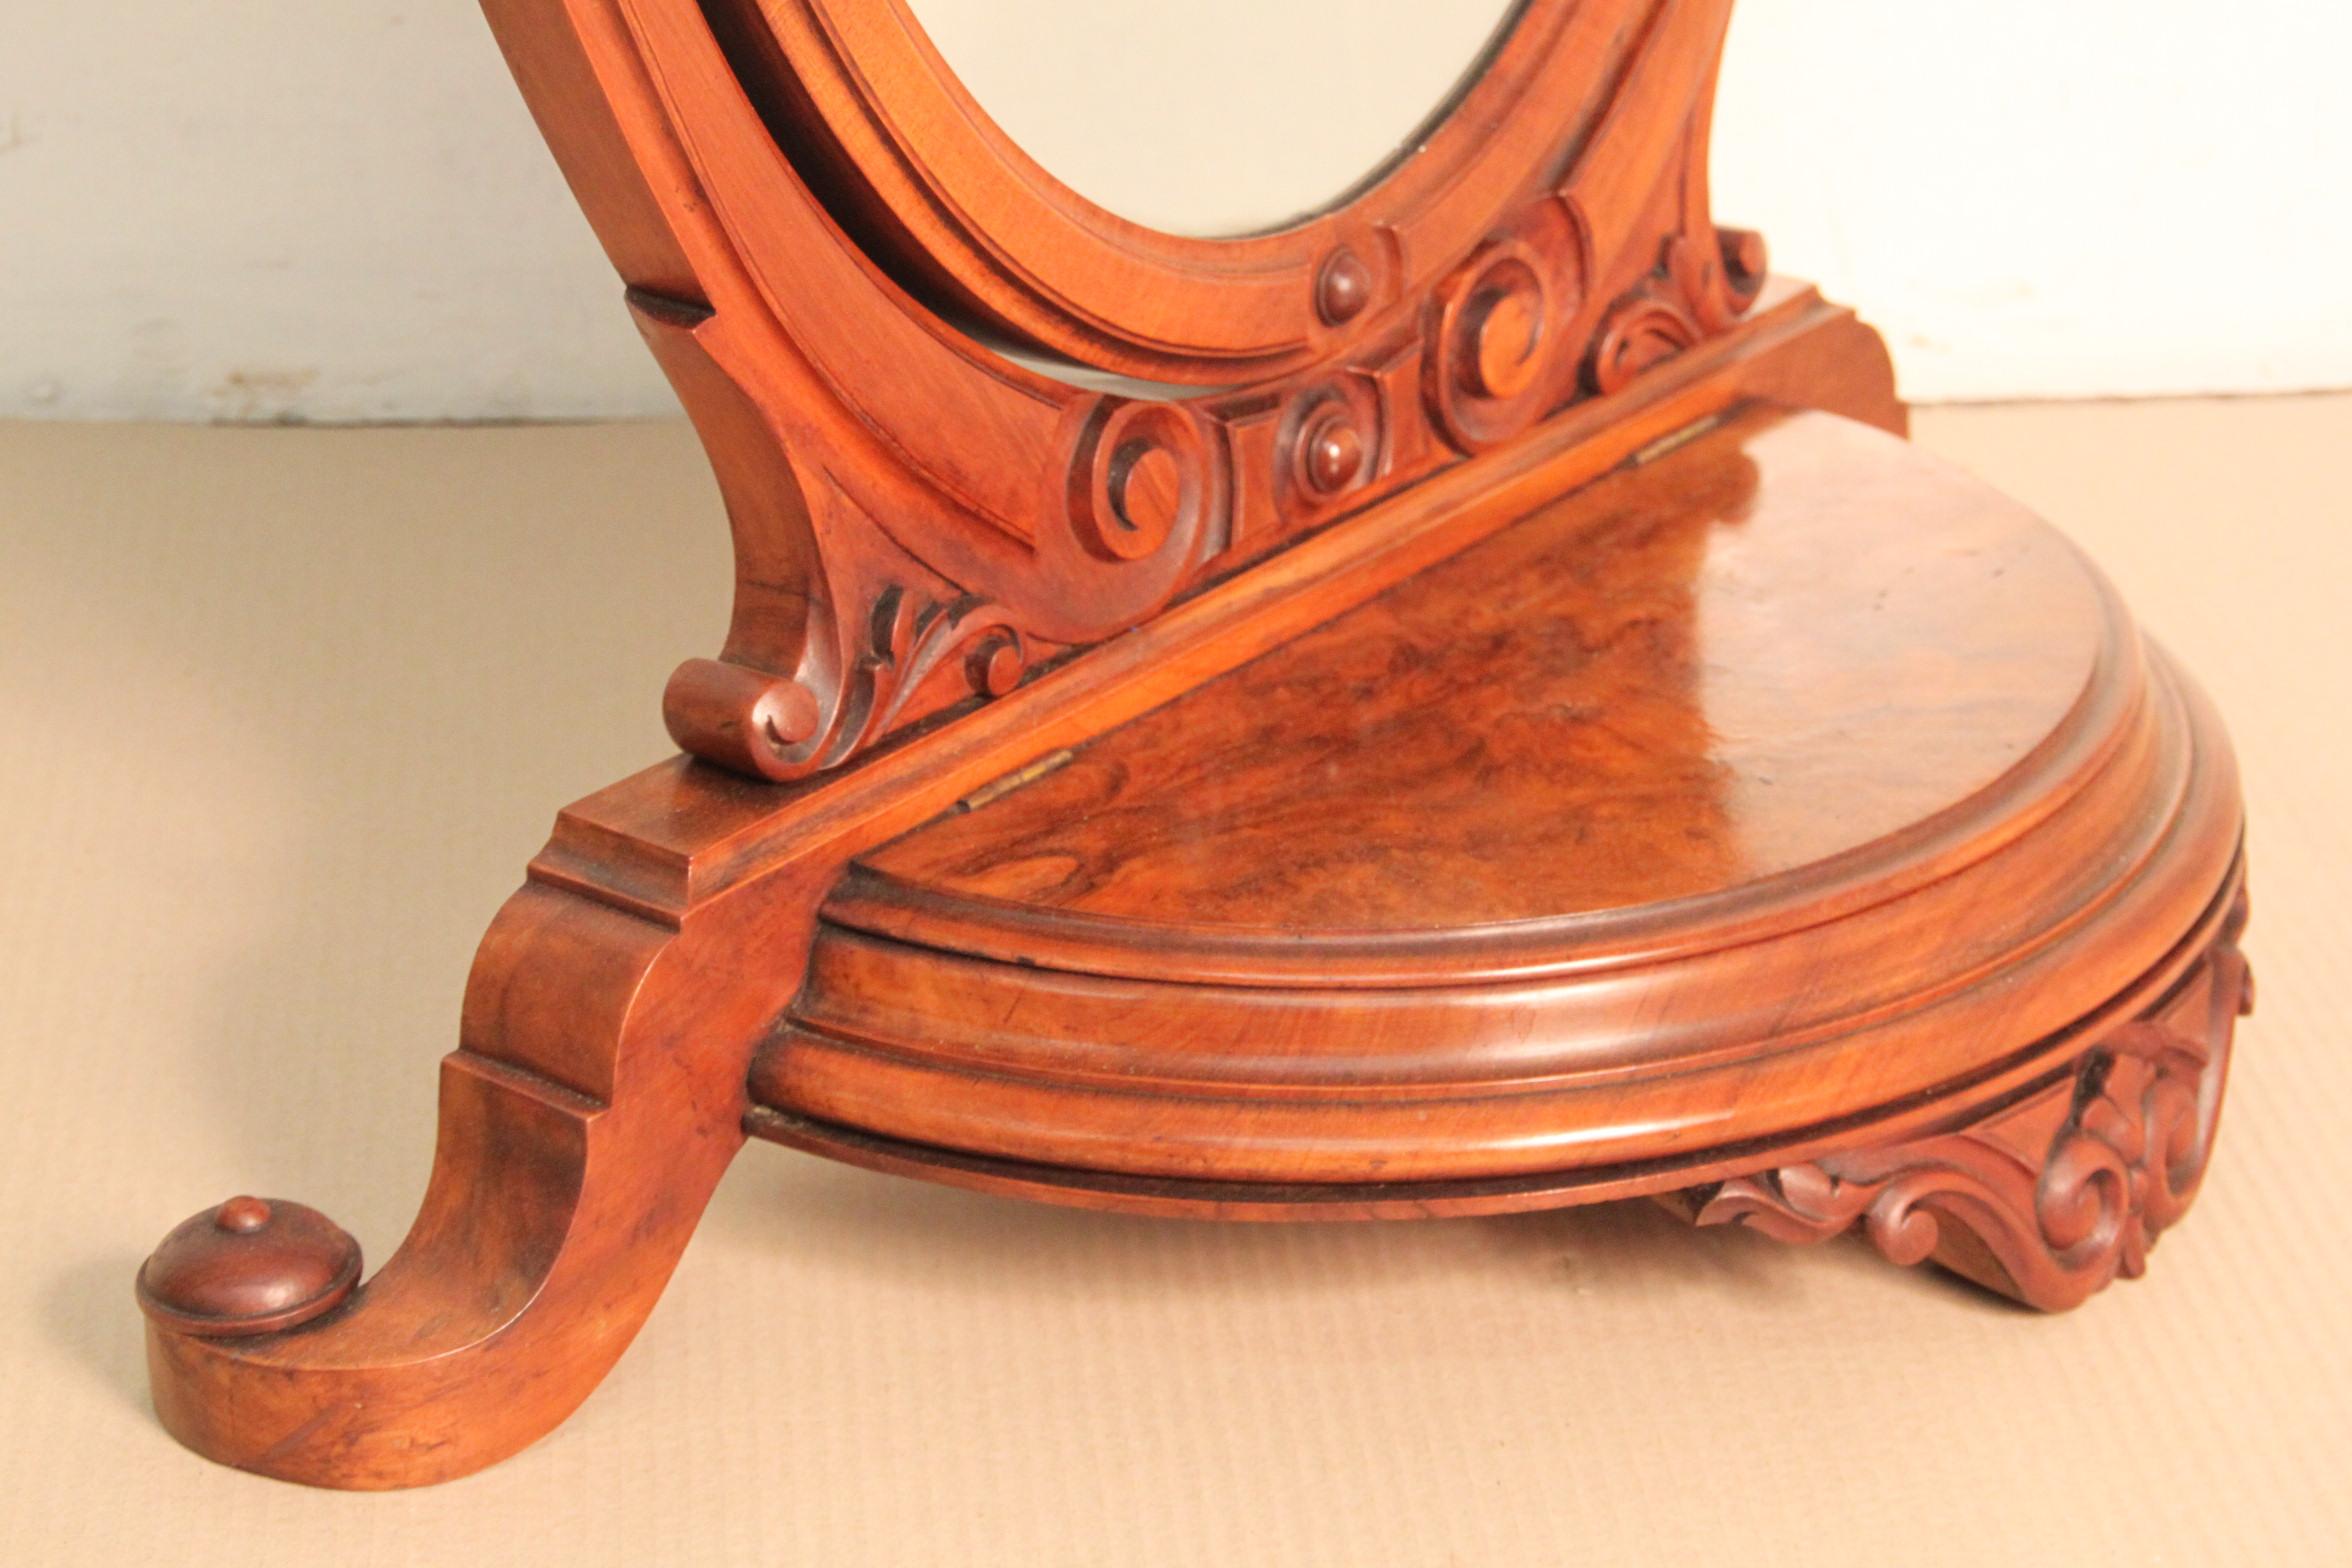 A very good quality Victorian toilet mirror. Made from solid walnut and lovely burr walnut veneers. The mirror is adjustable within the frame. The base section with a lift up top jewelry box. This delightful mirror is offered for sale in very good